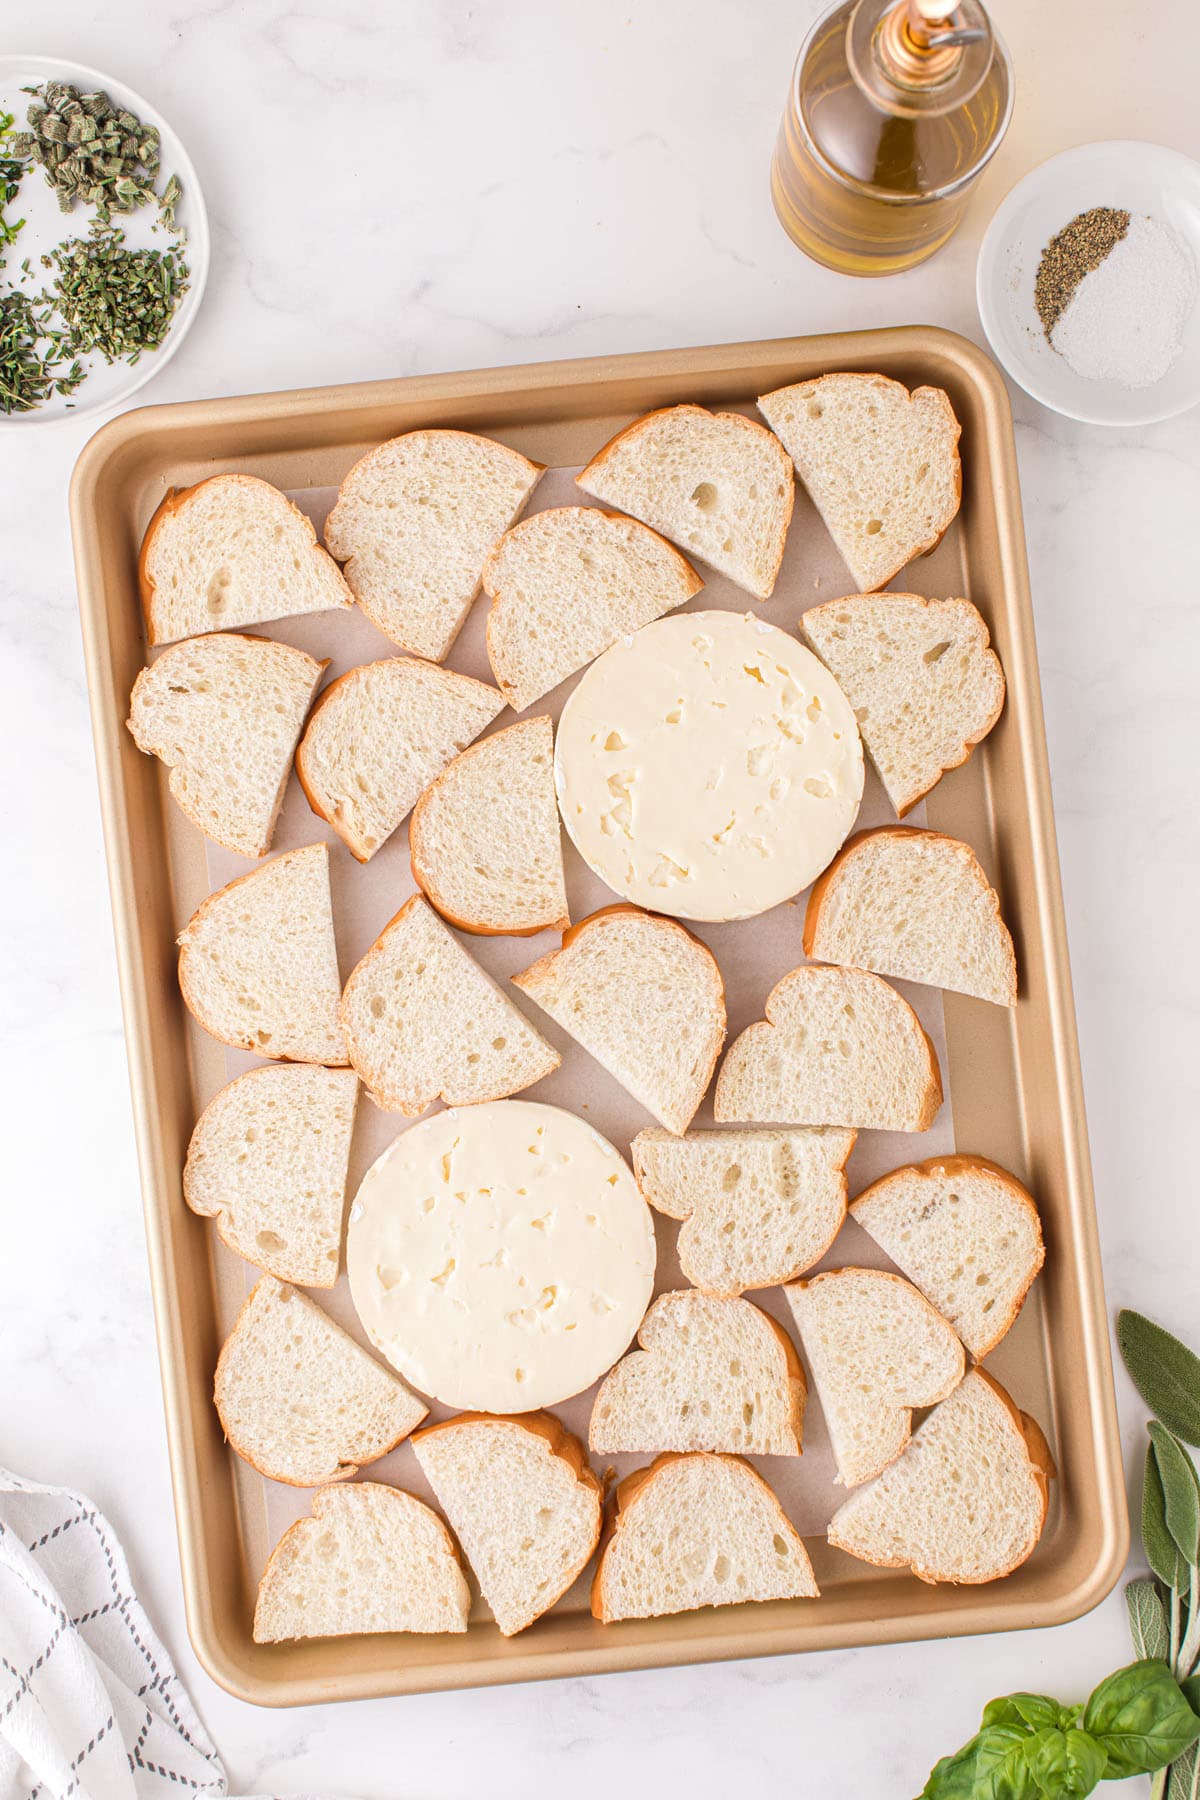 brie cheese and bread slices on baking tray